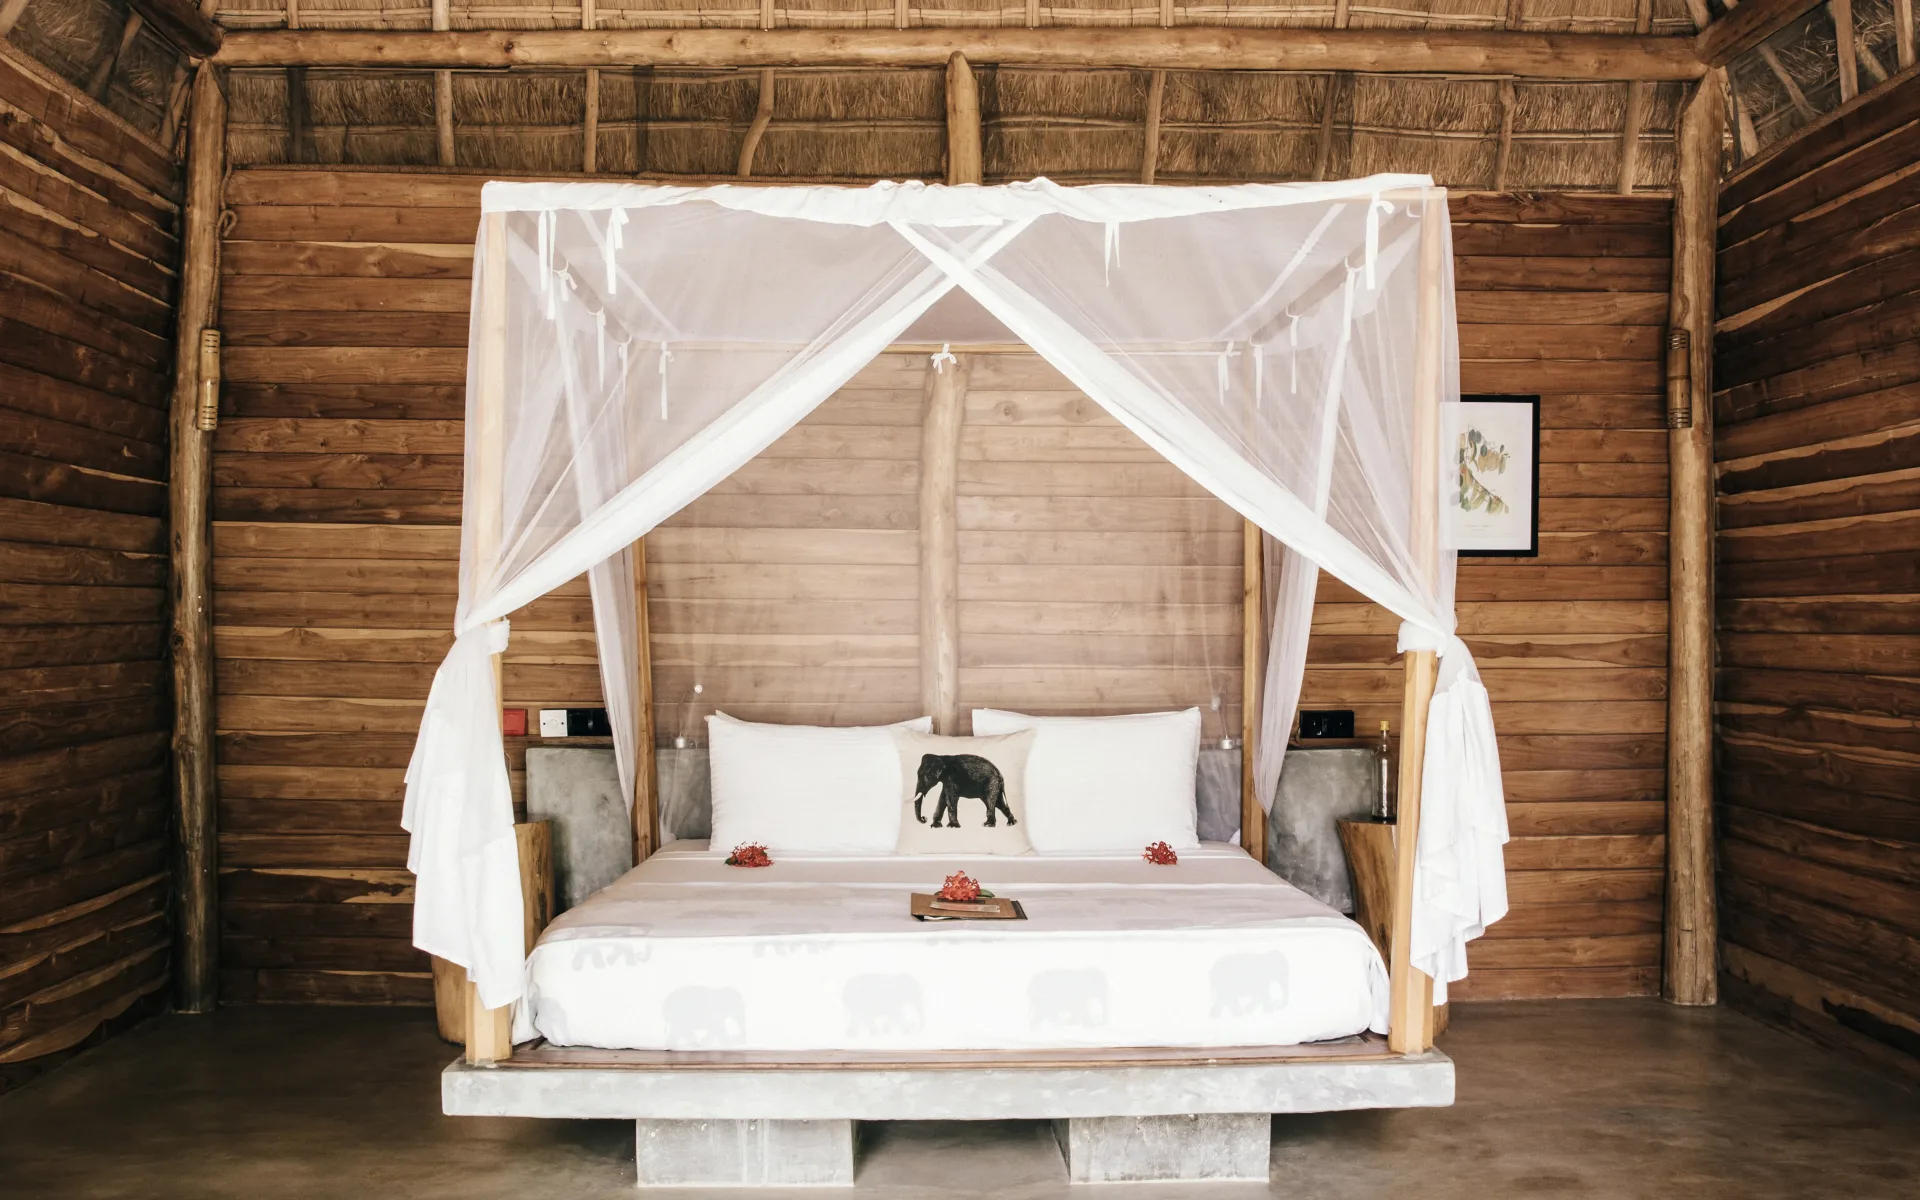 A four-poster bed sits in the centre of one of the bedrooms, dressed in crisp white sheets and a pillow printed with an image of an Asian elephant.